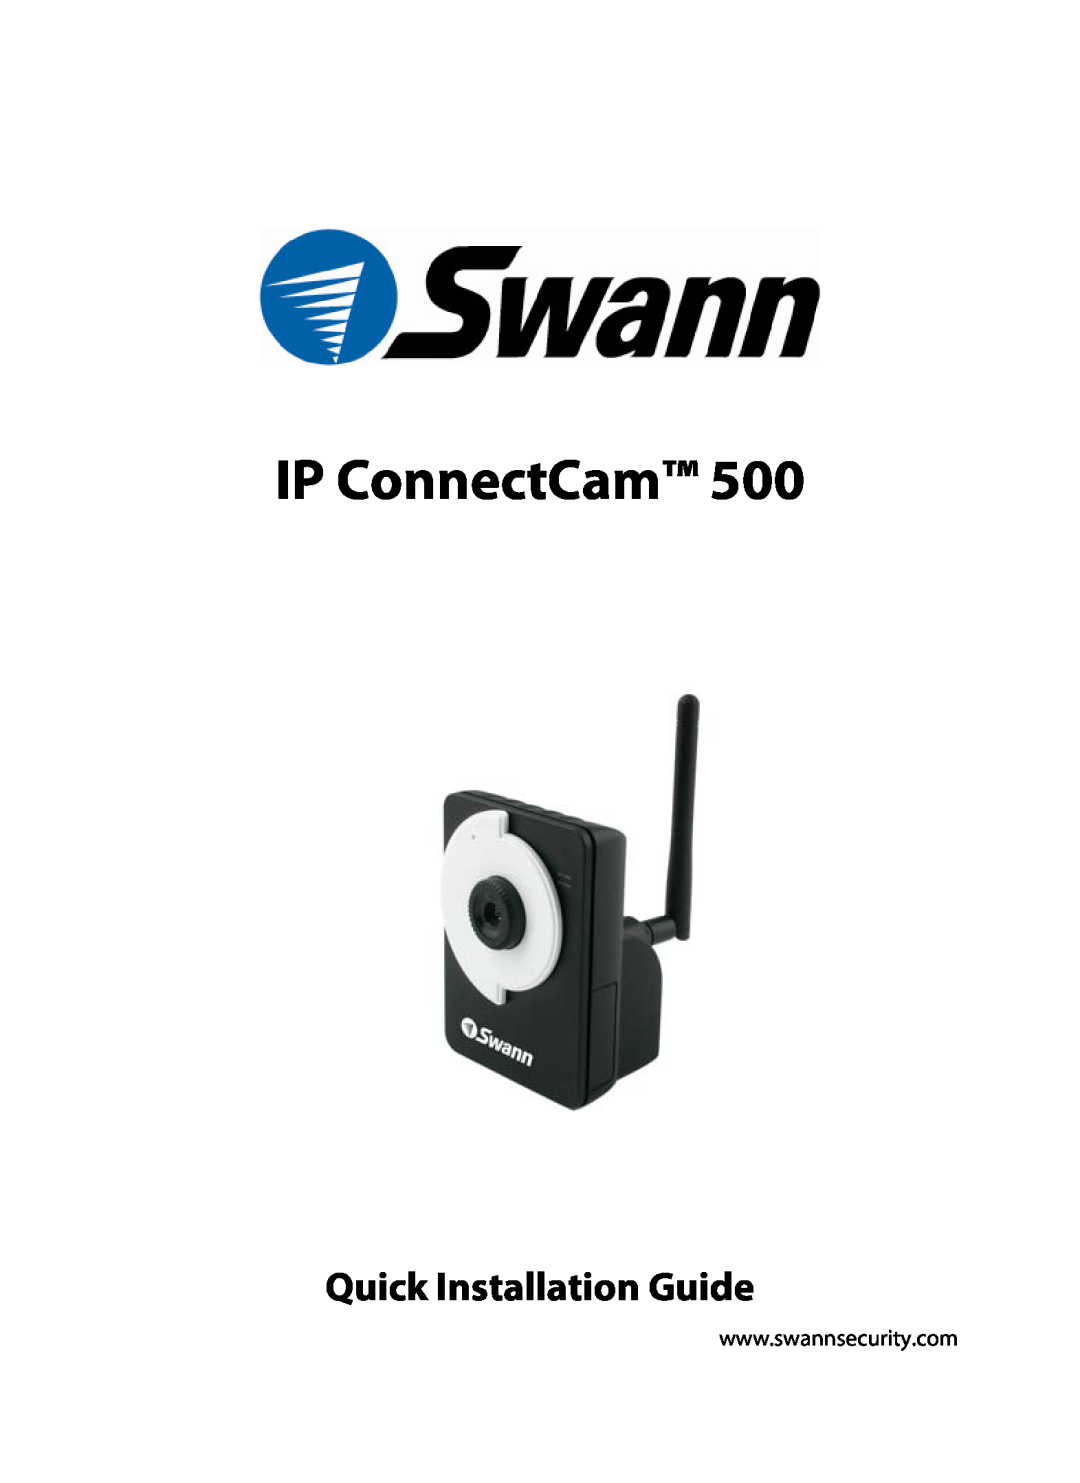 Swann 500 manual Quick Installation Guide, IP ConnectCam 